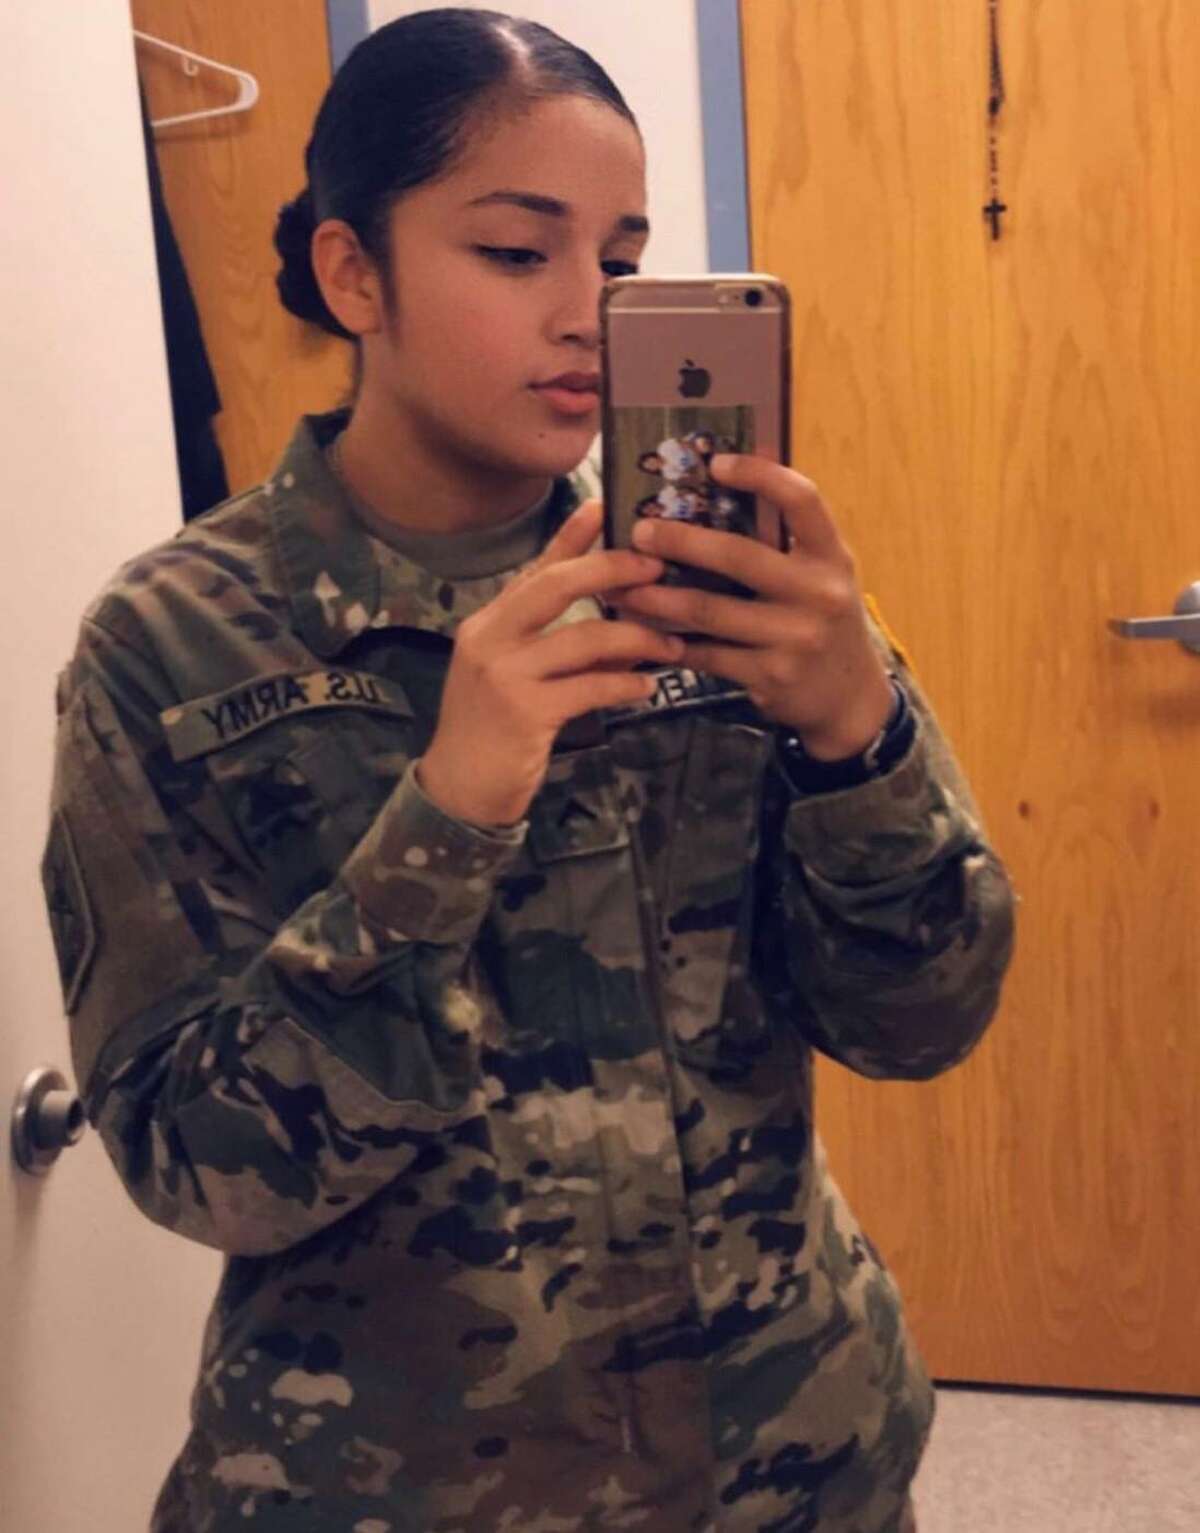 Family photo of Spc. Vanessa Guillen, who was last seen on April 22, 2020, in a parking lot at the Fort Hood Army base in Killeen, Texas.